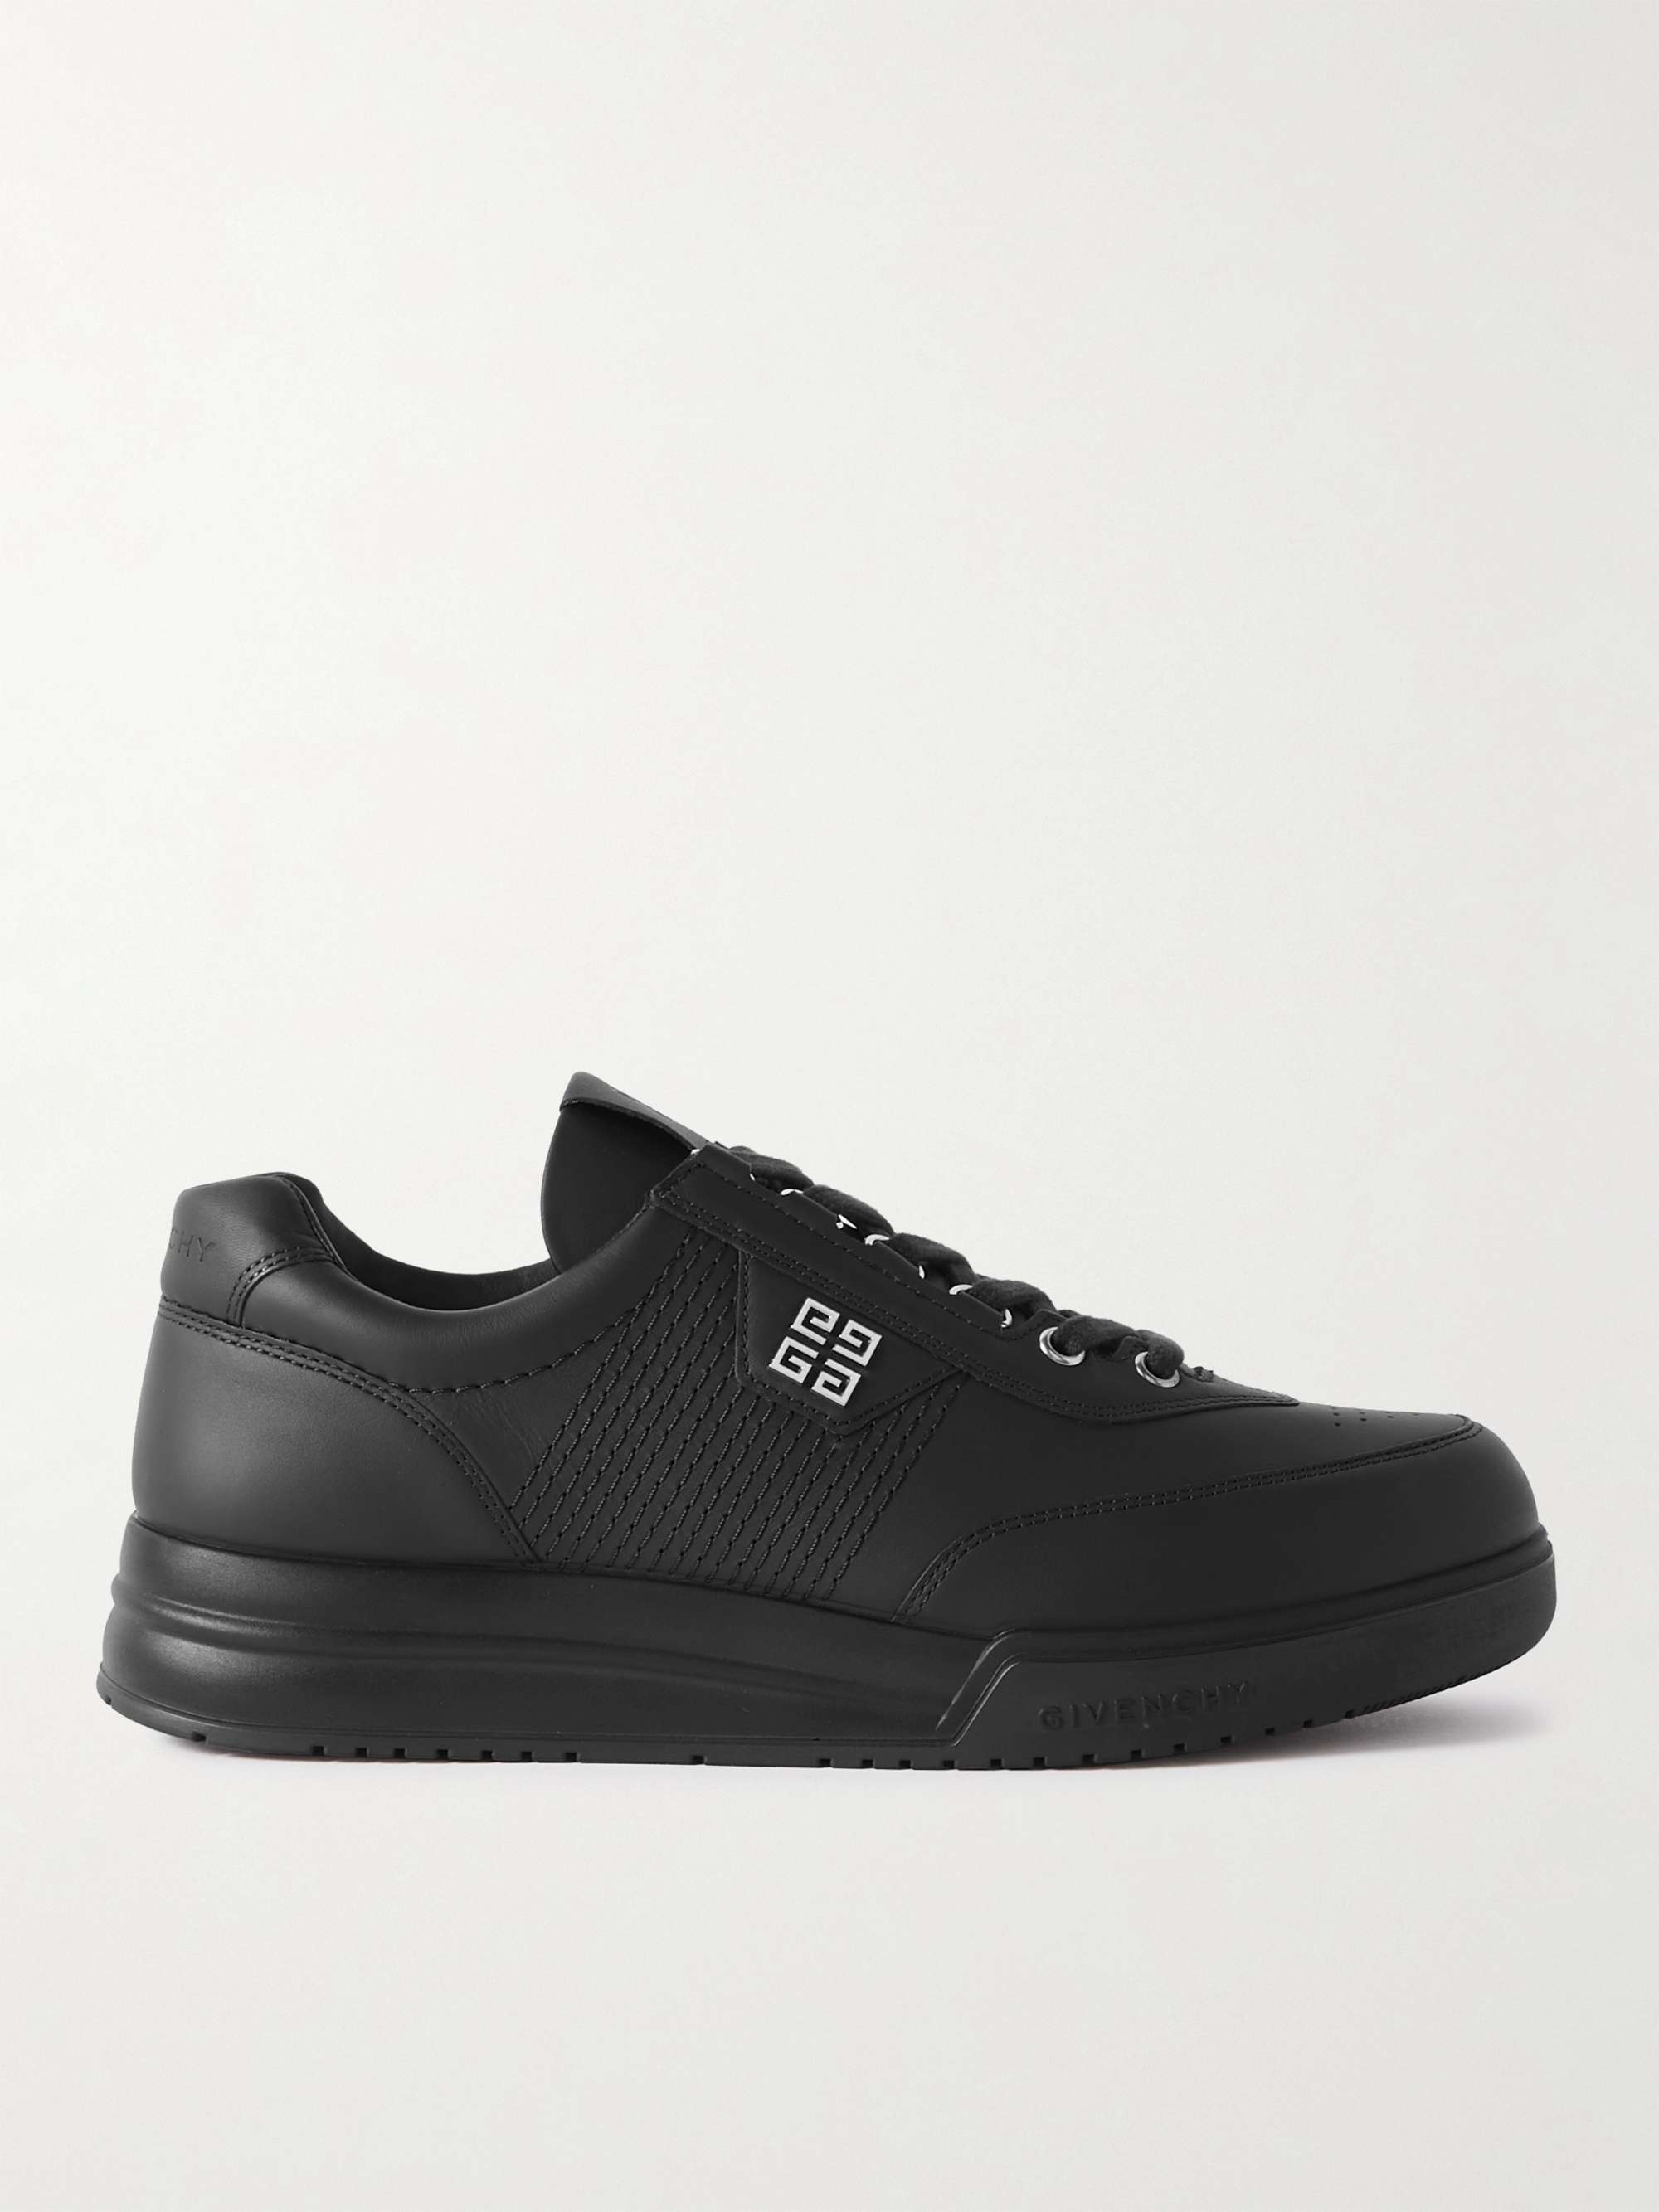 GIVENCHY G-4 Logo-Appliquéd Leather Sneakers